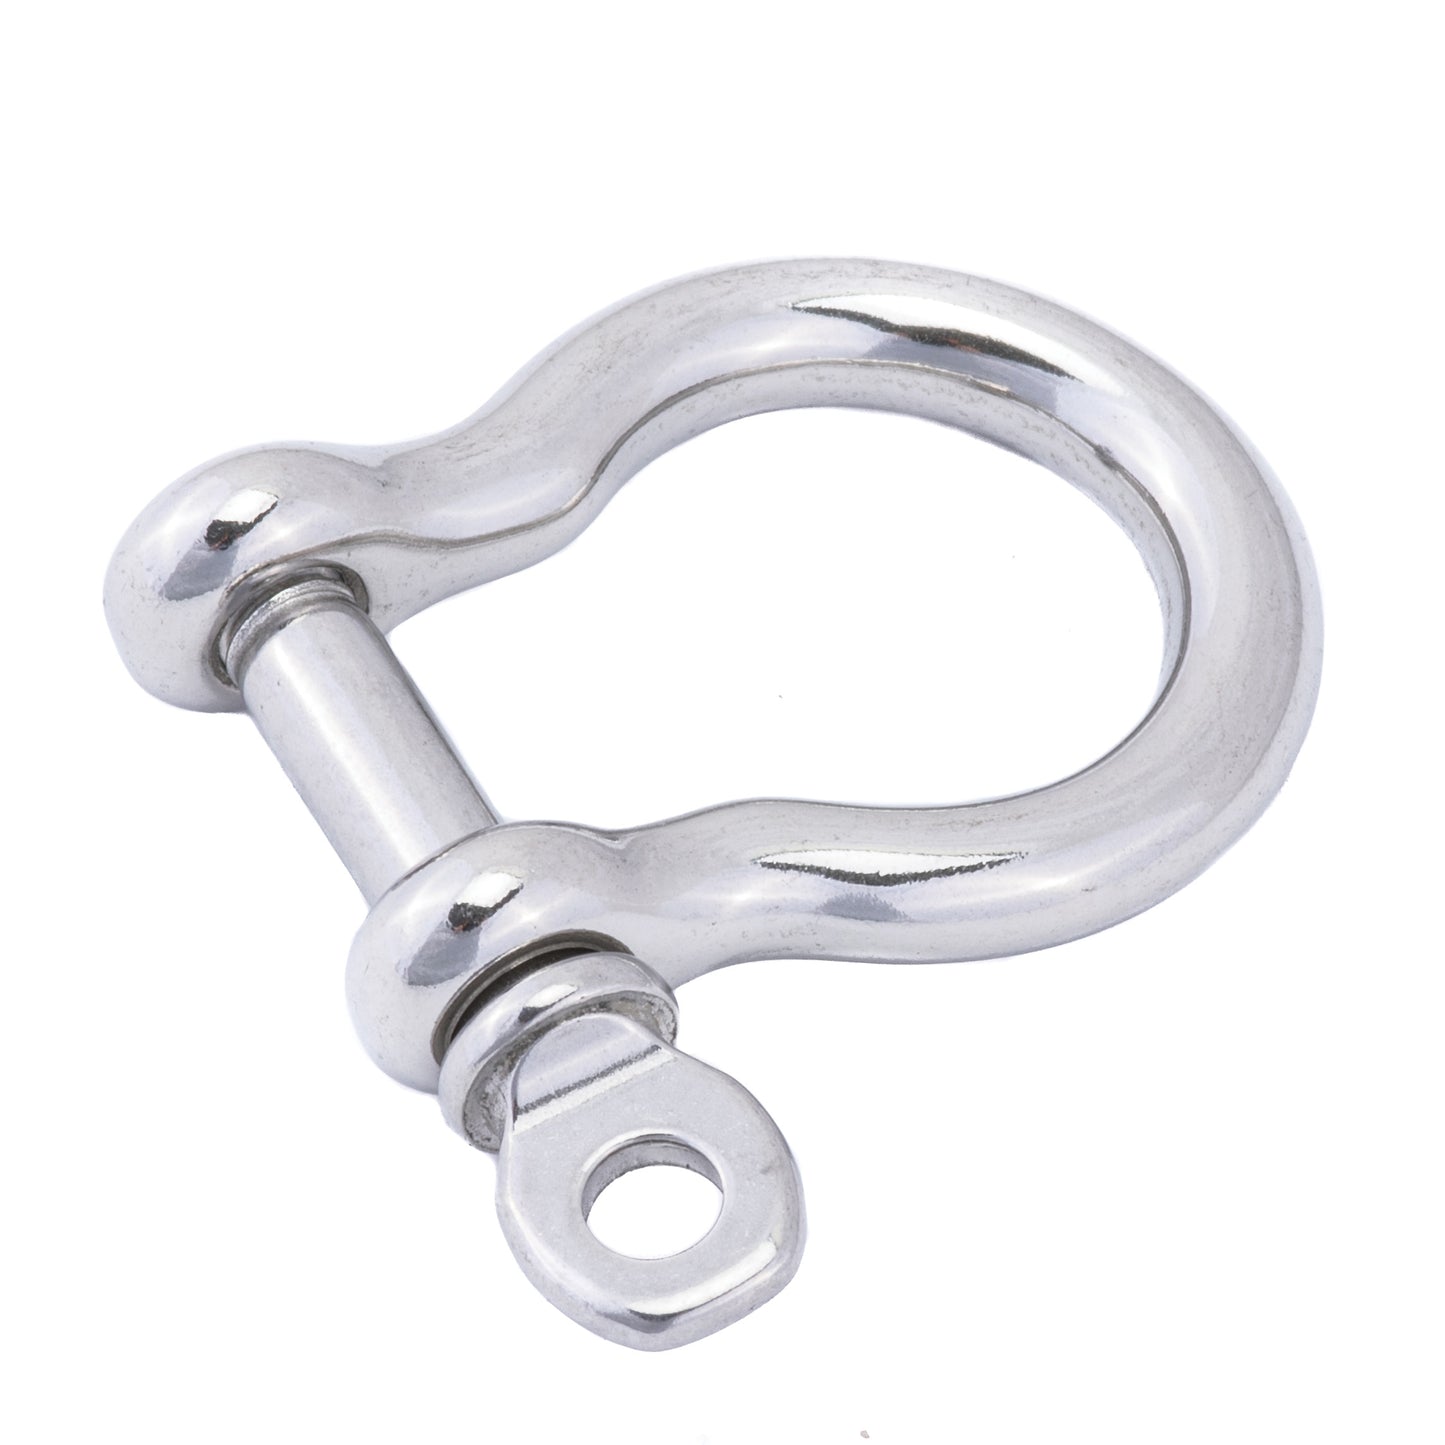 3/16" Stainless Steel Shackle